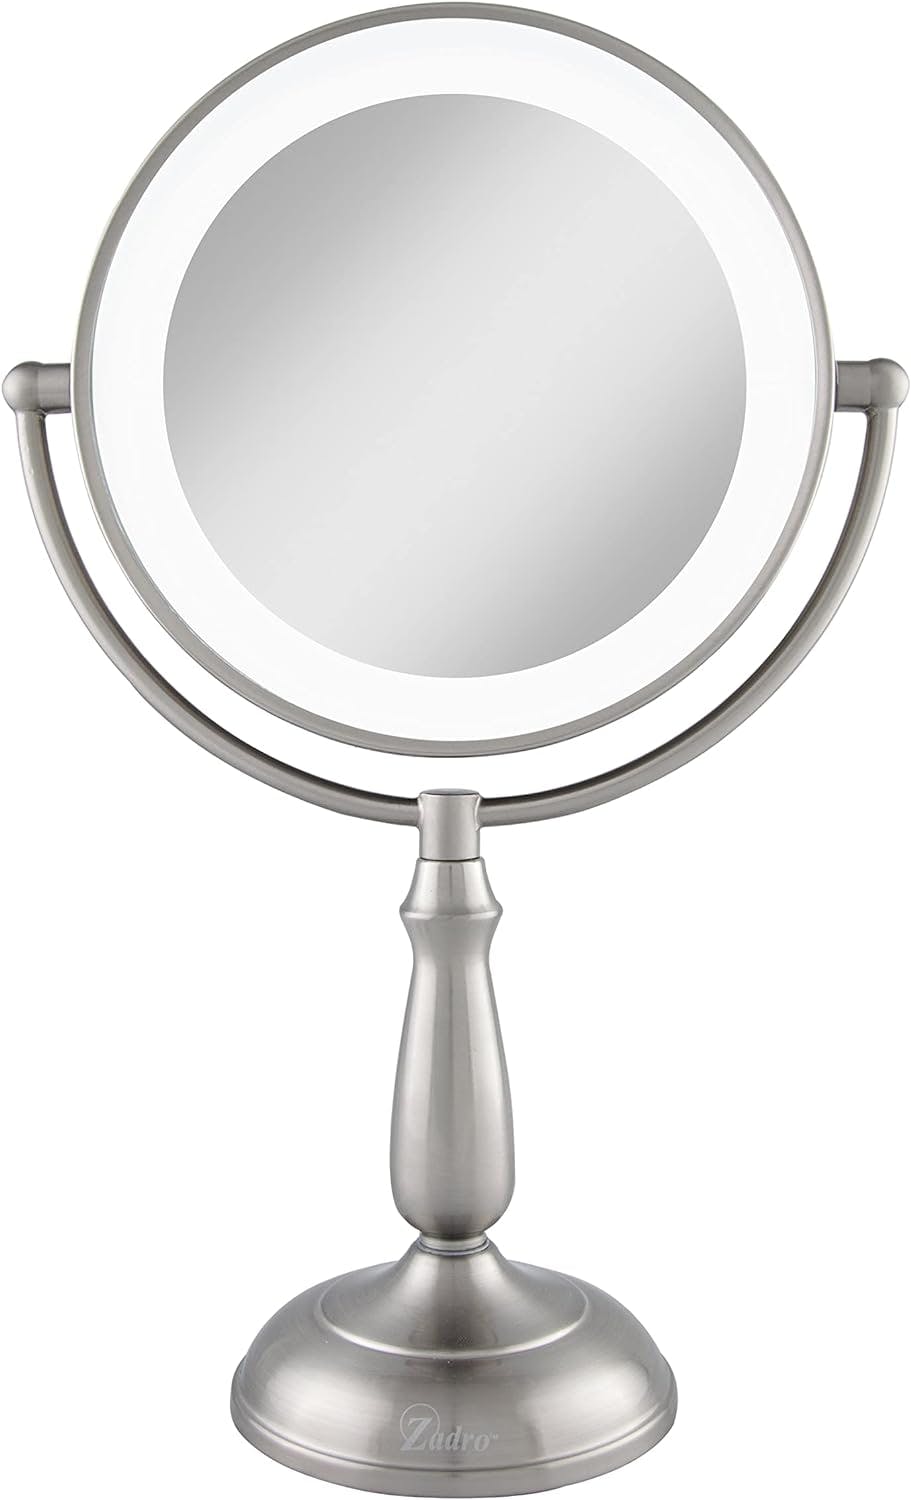 Zadro Touch LED 11" Magnifying Countertop Mirror with Smart Dimmer